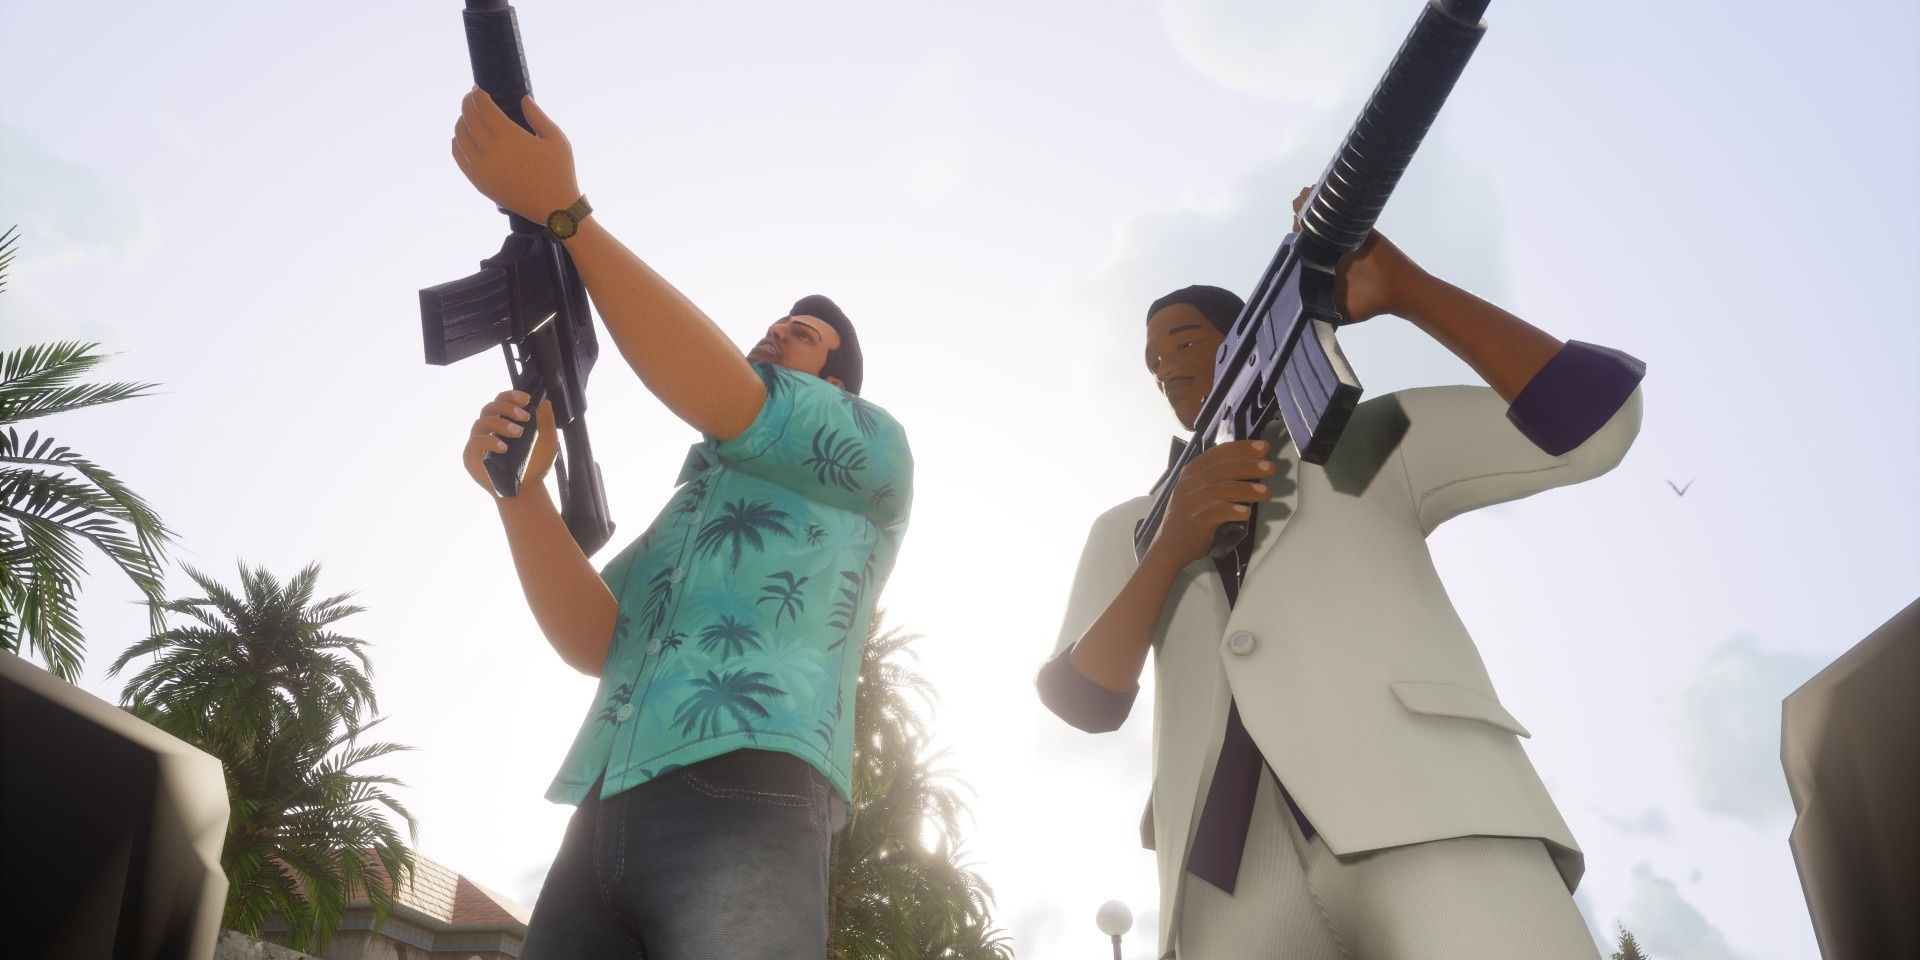 Tommy and Lance inspecting machine guns in Grand Theft Auto: Vice City - The Definitive Edition